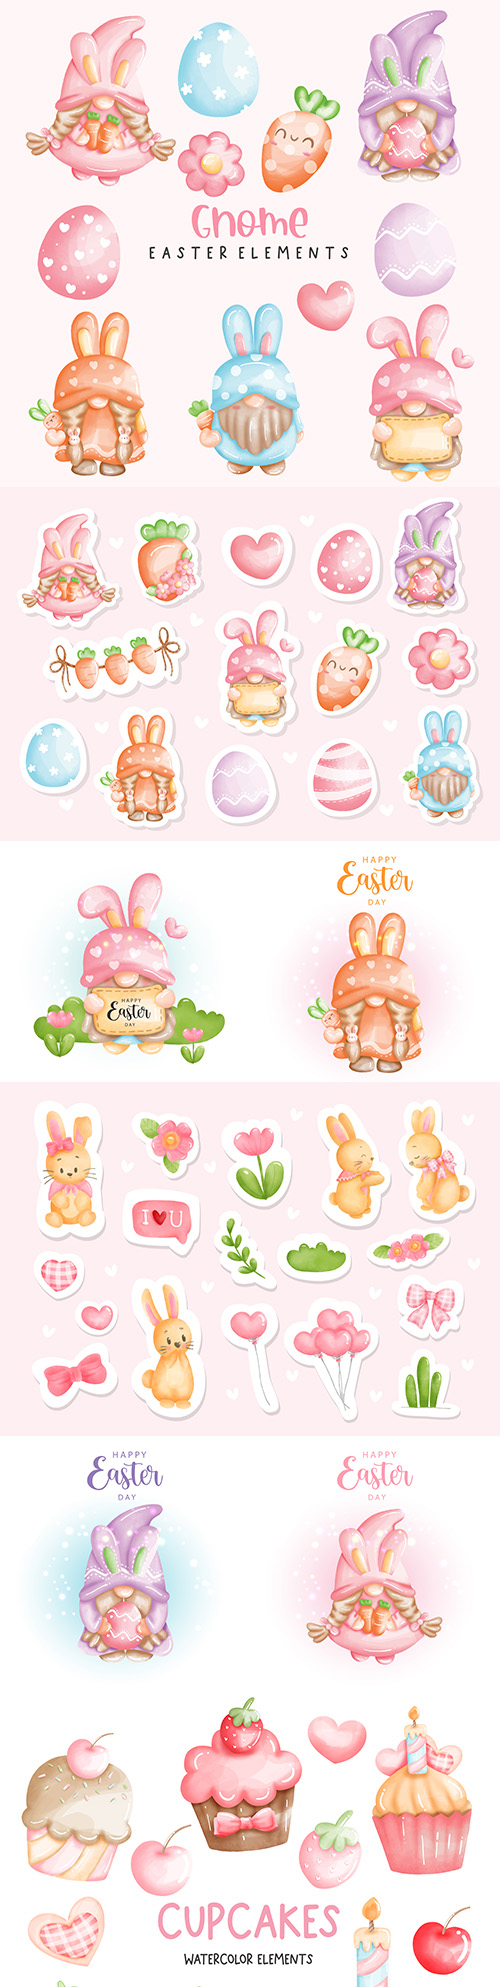 Happy Easter with cute gnome and watercolor stickers
